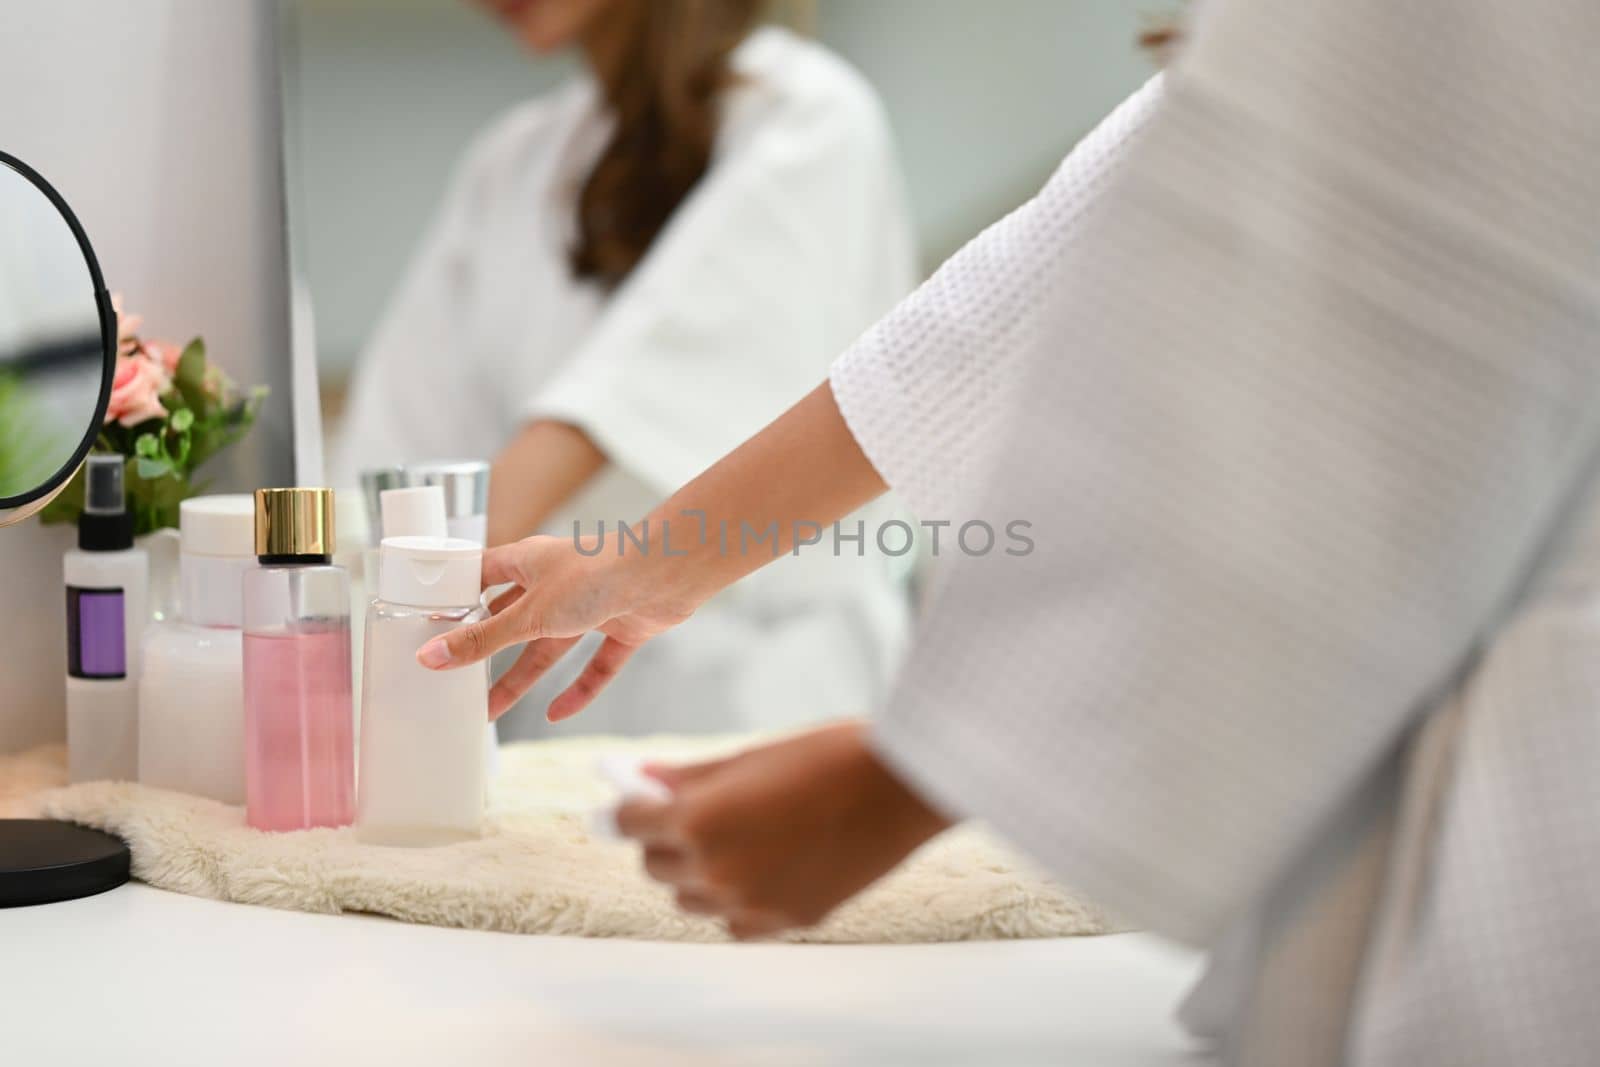 Cropped shot of woman in bathrobe choosing cosmetic package on dresser table. Beauty treatment and self care concept.